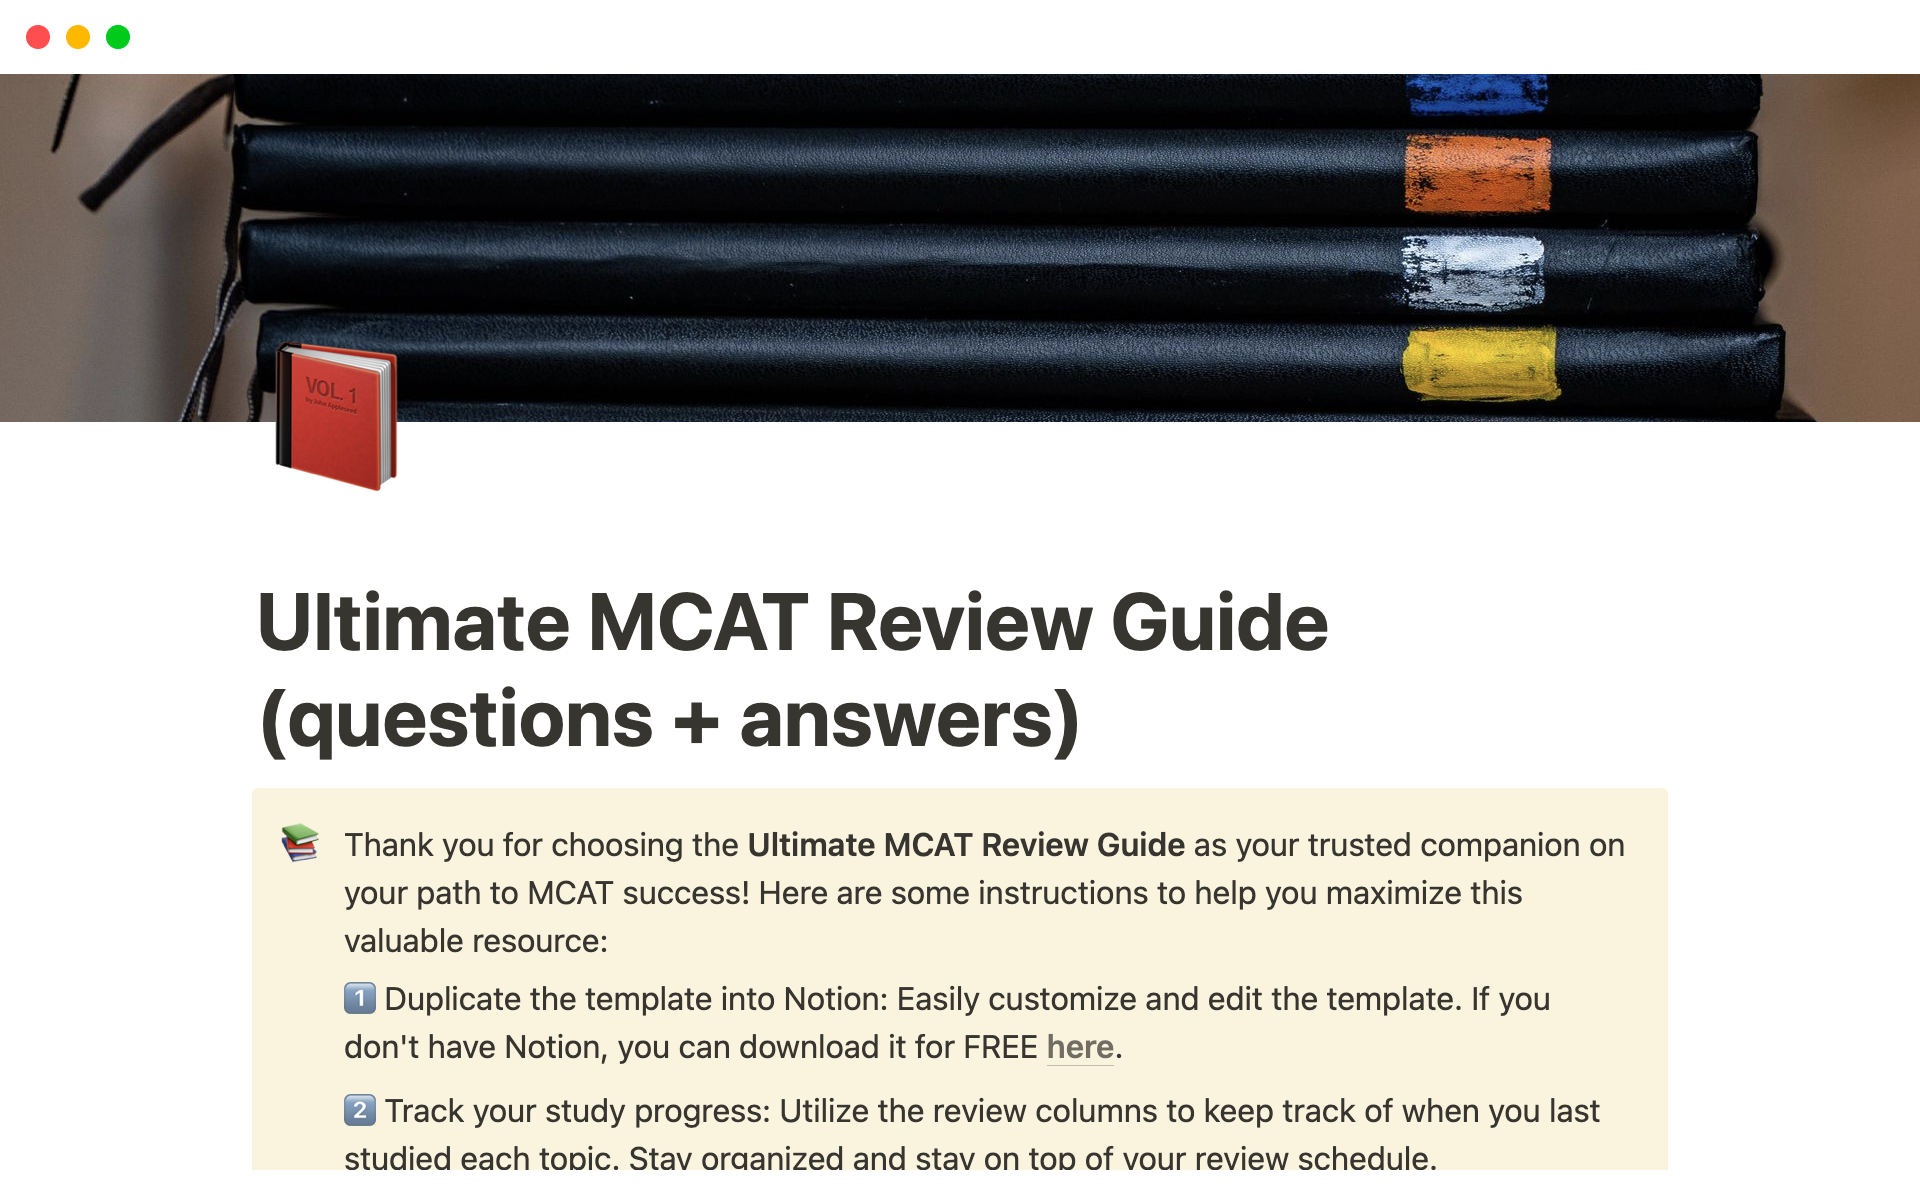 The Ultimate MCAT Review Guide is a resource based on research-backed techniques, featuring over 1500 active review questions, designed to maximize your MCAT score.